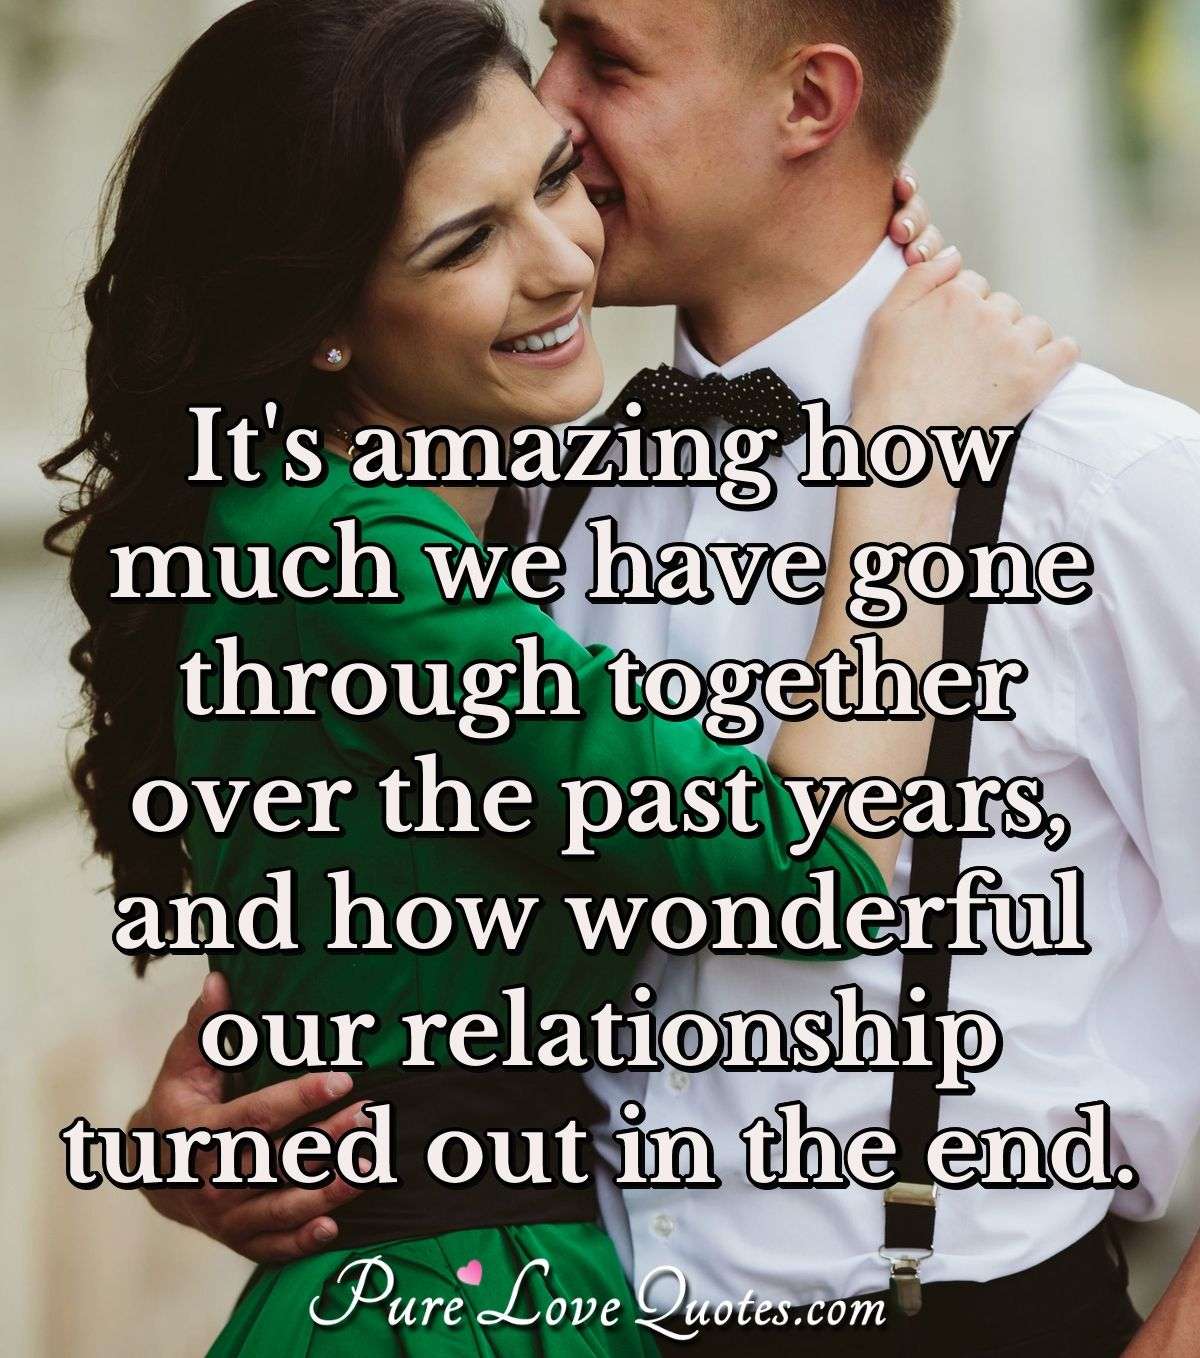 It's amazing how much we have gone through together over the past years, and how wonderful our relationship turned out in the end. - PureLoveQuotes.com